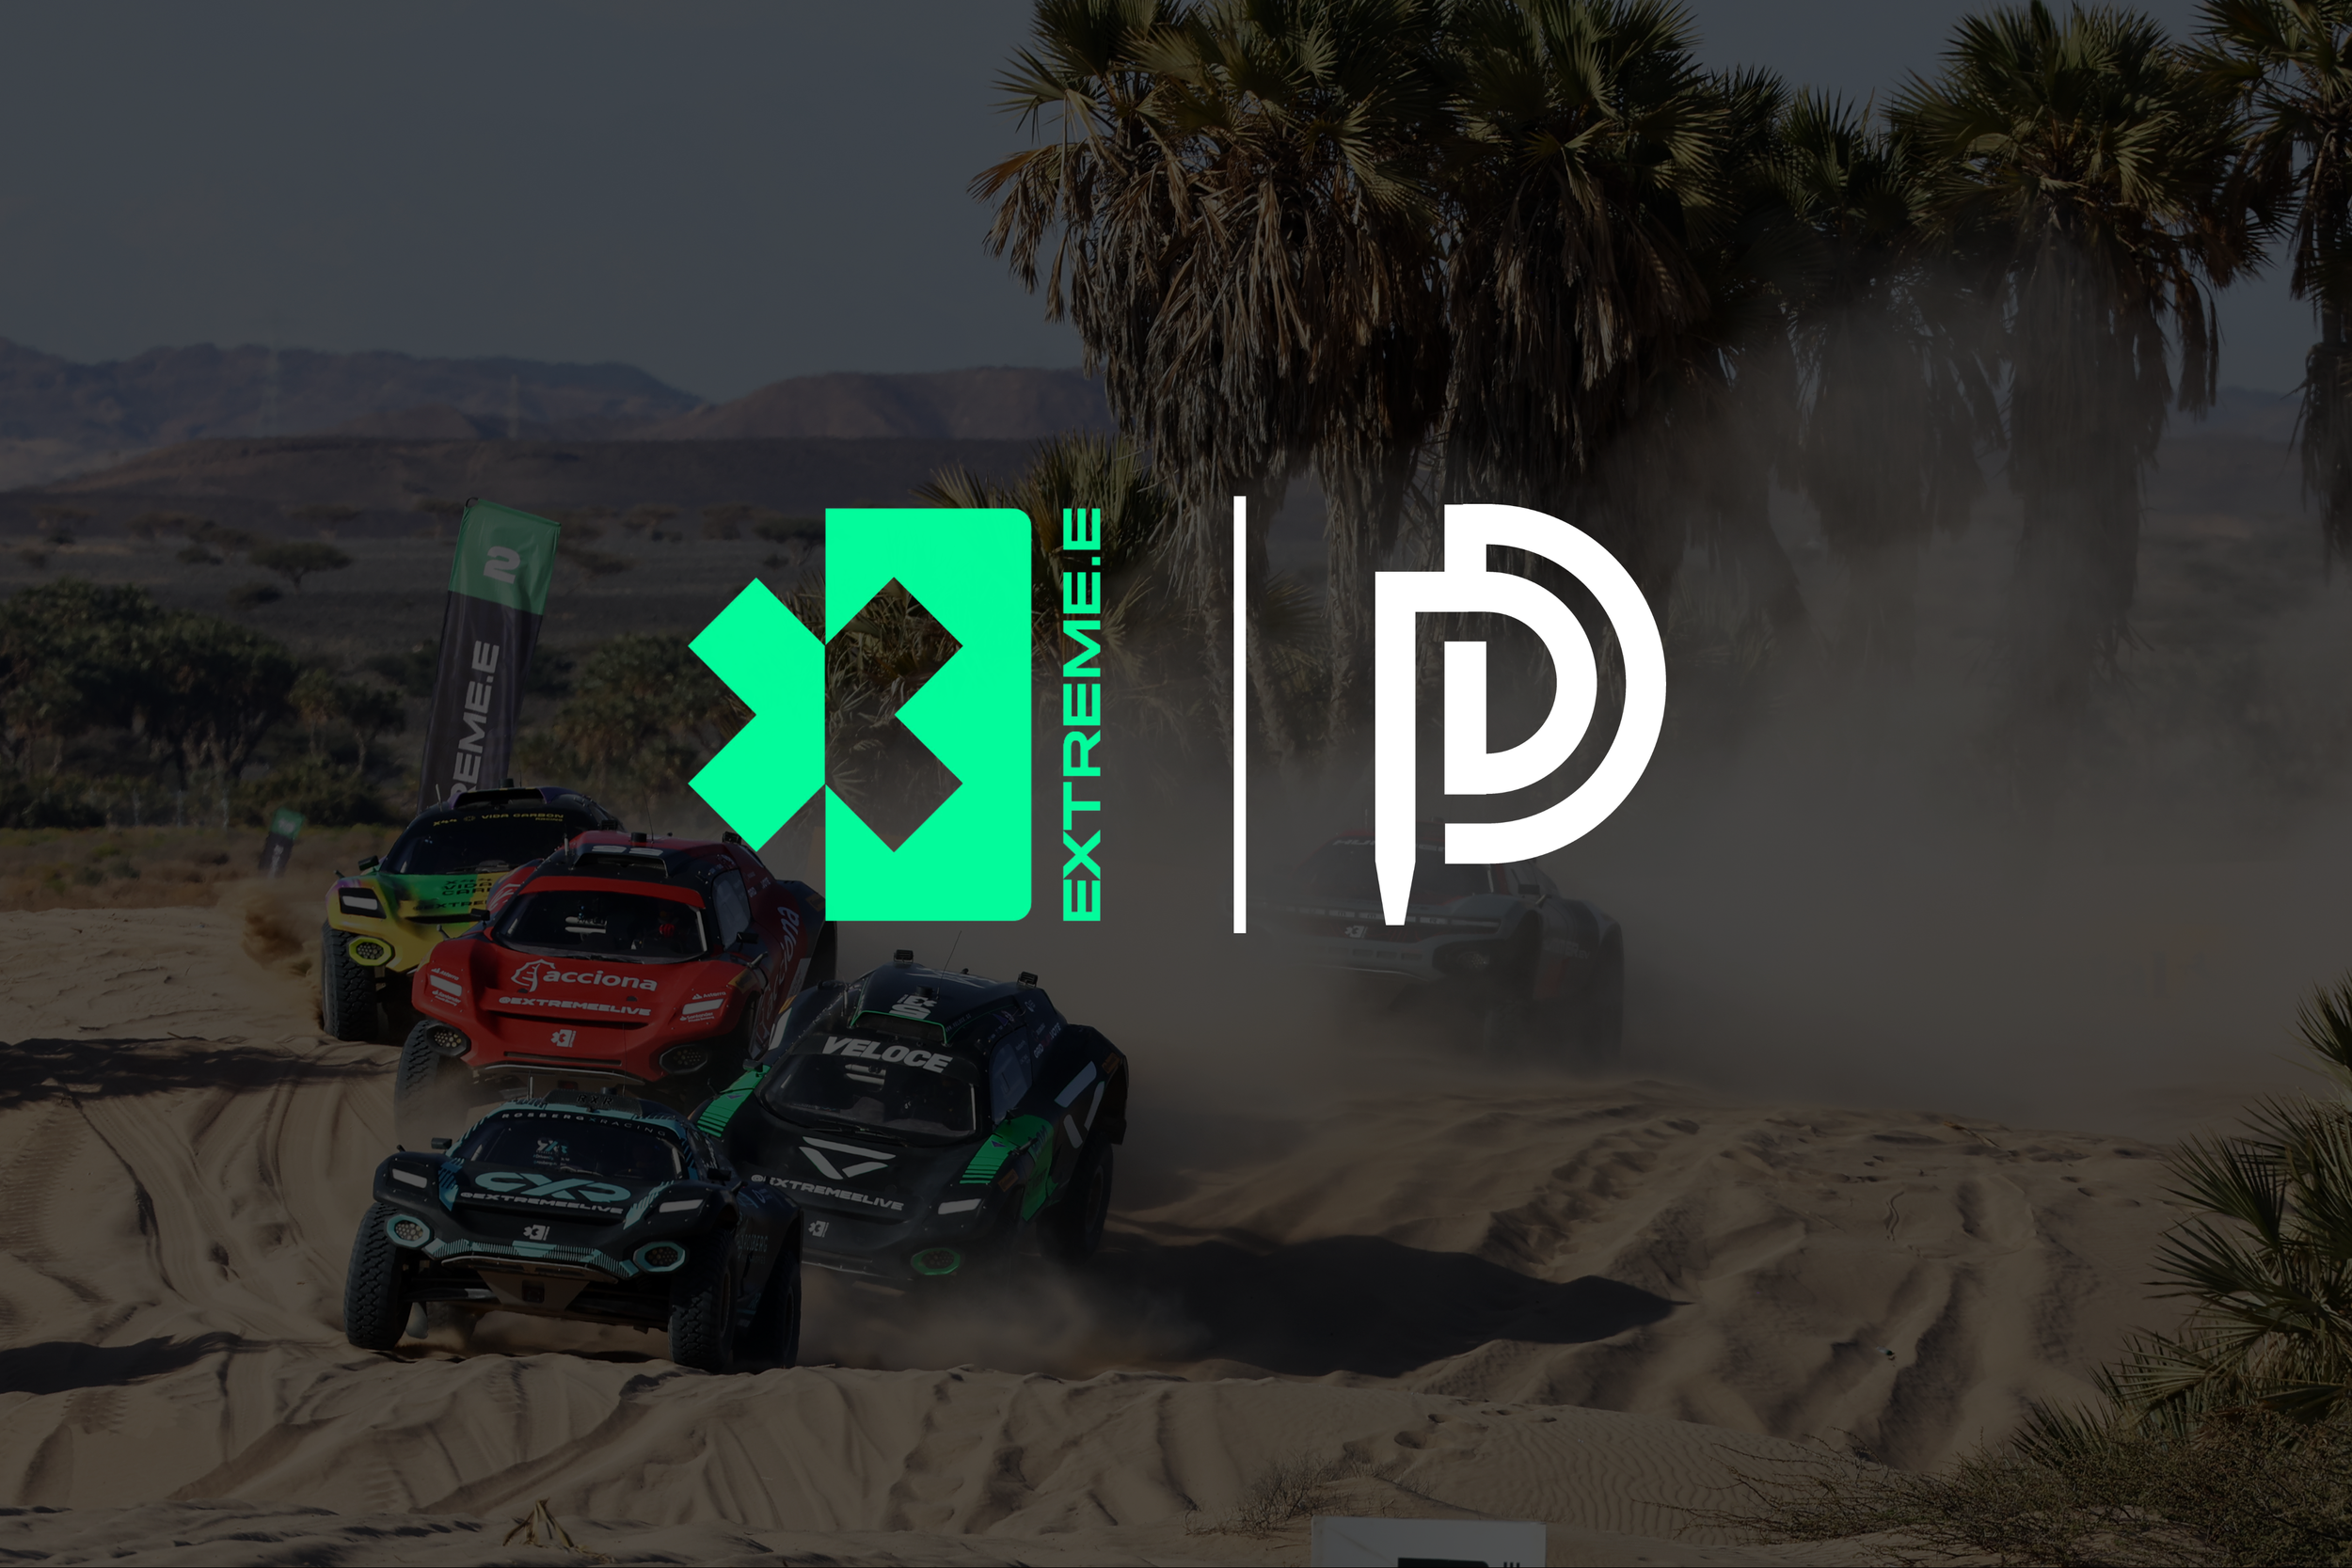  “We are looking forward to collaborating with PinDrop, whose insights and innovations are going to be invaluable as we continue to expand our championship and its wider exposure”   Ali Russell, Managing Director Extreme E  